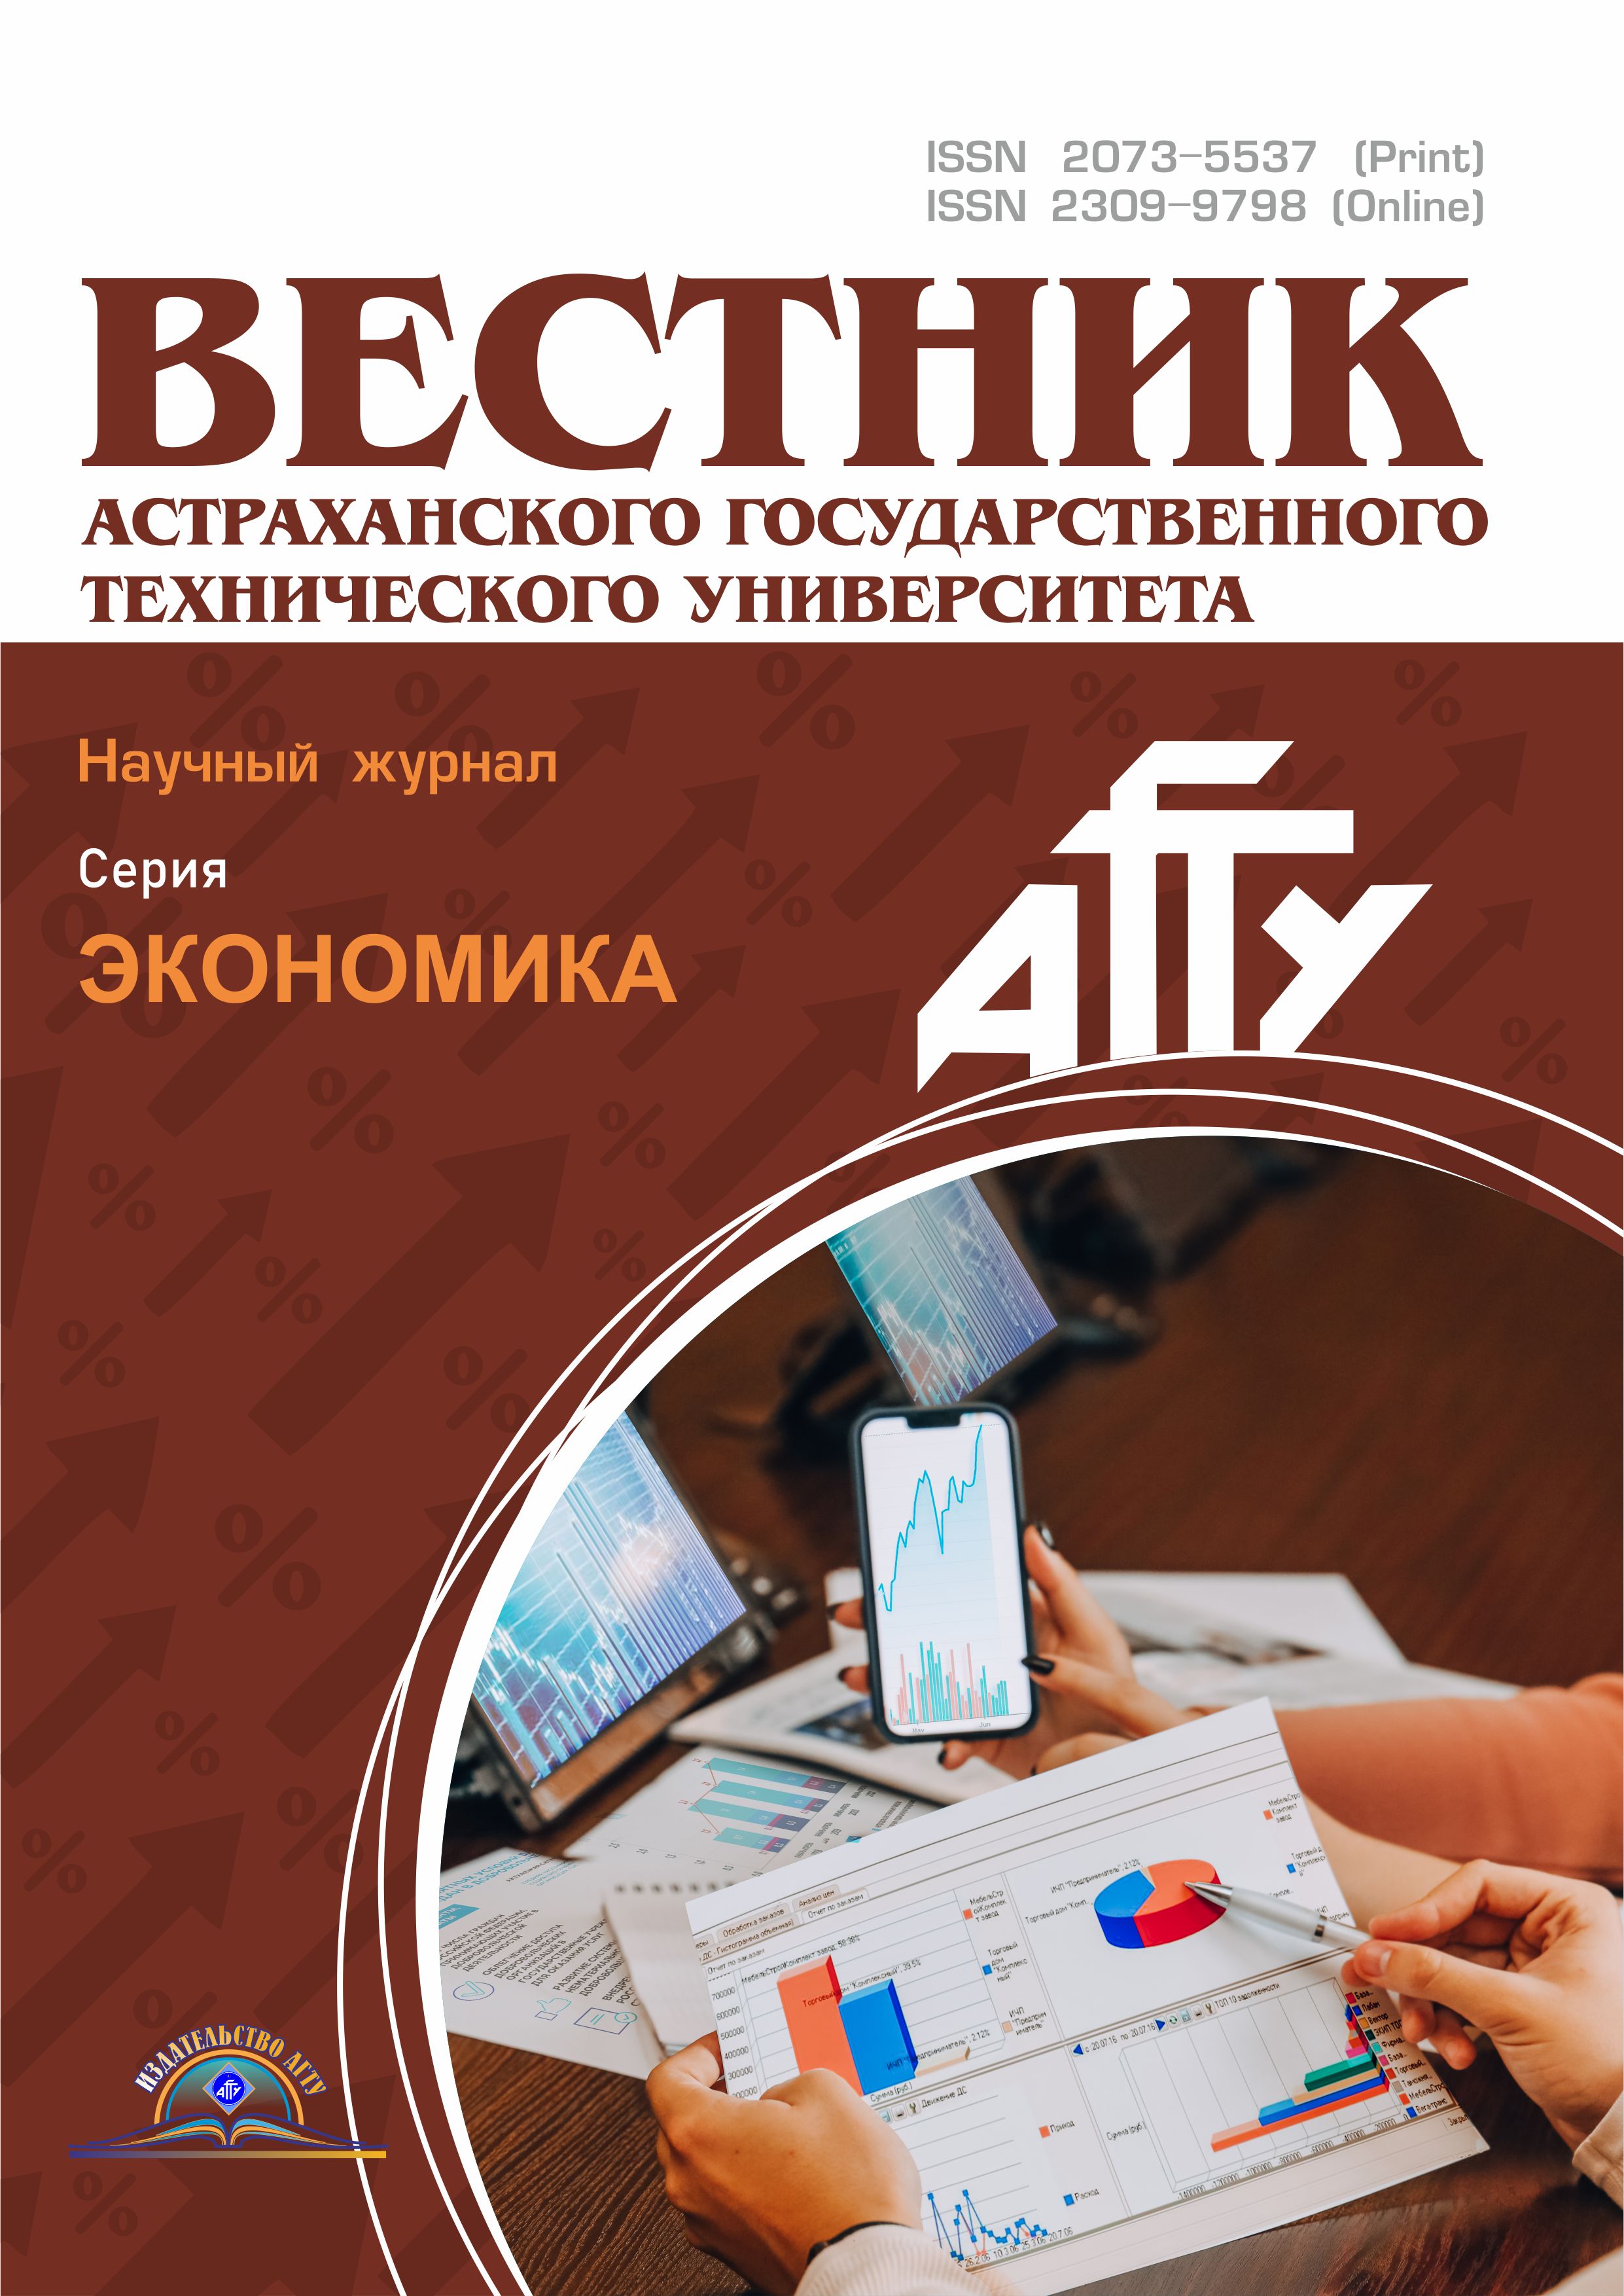                         FACTORS OF INFLUENCE ON CONSUMER BEHAVIOR: THE RESULTS OF THE EMPIRICAL RESEARCH OF THE REAL ESTATE MARKET IN PERM AND PERM REGION
            